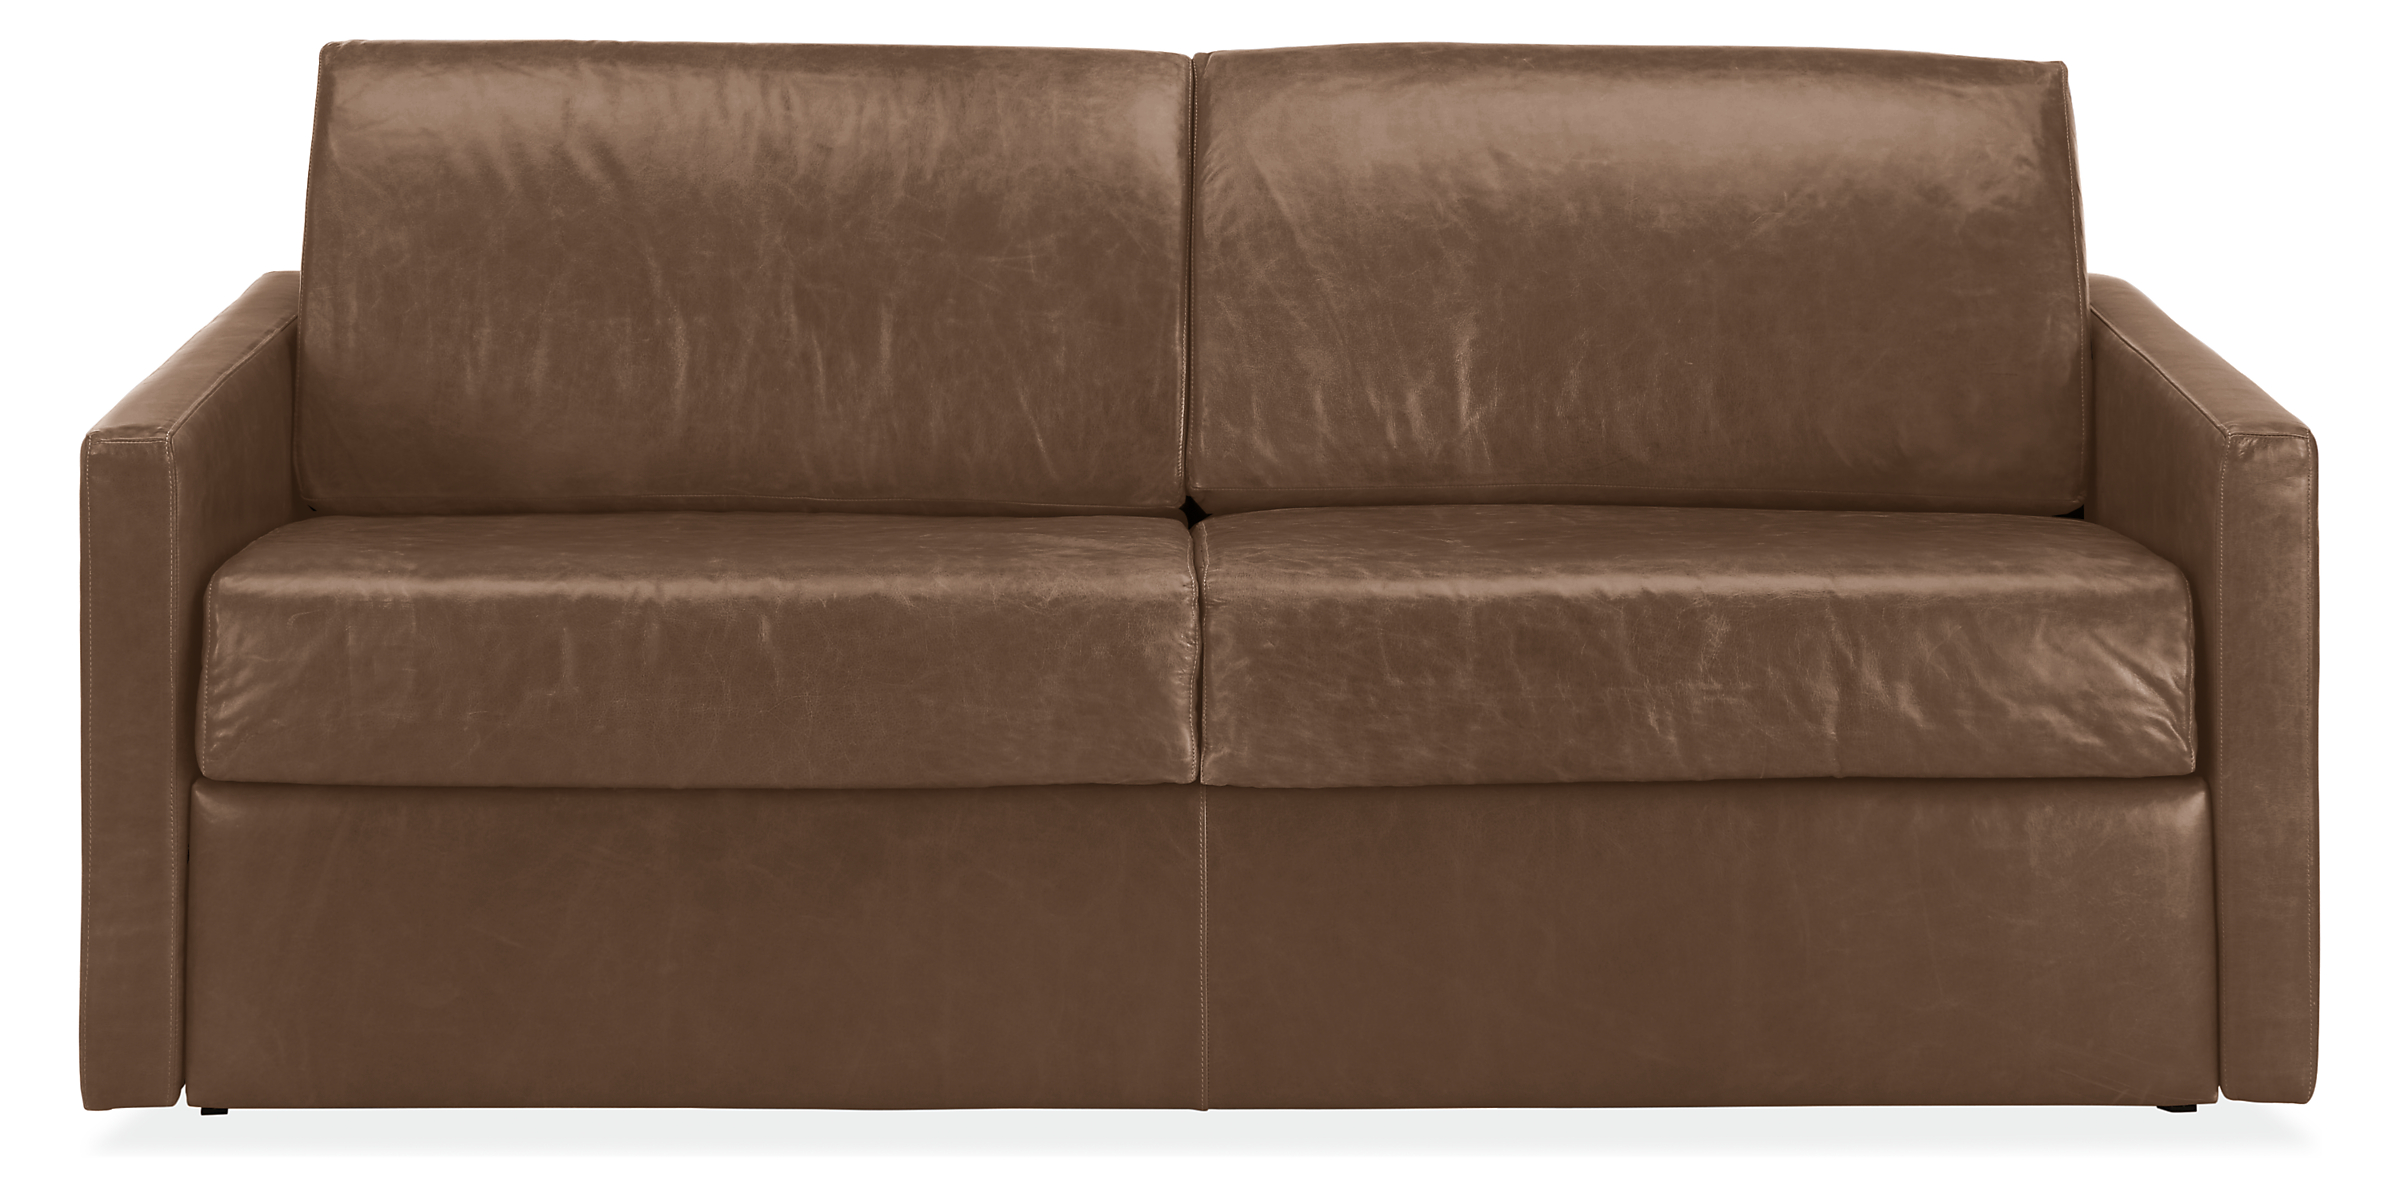 Franklin Leather Fold-out Sleeper